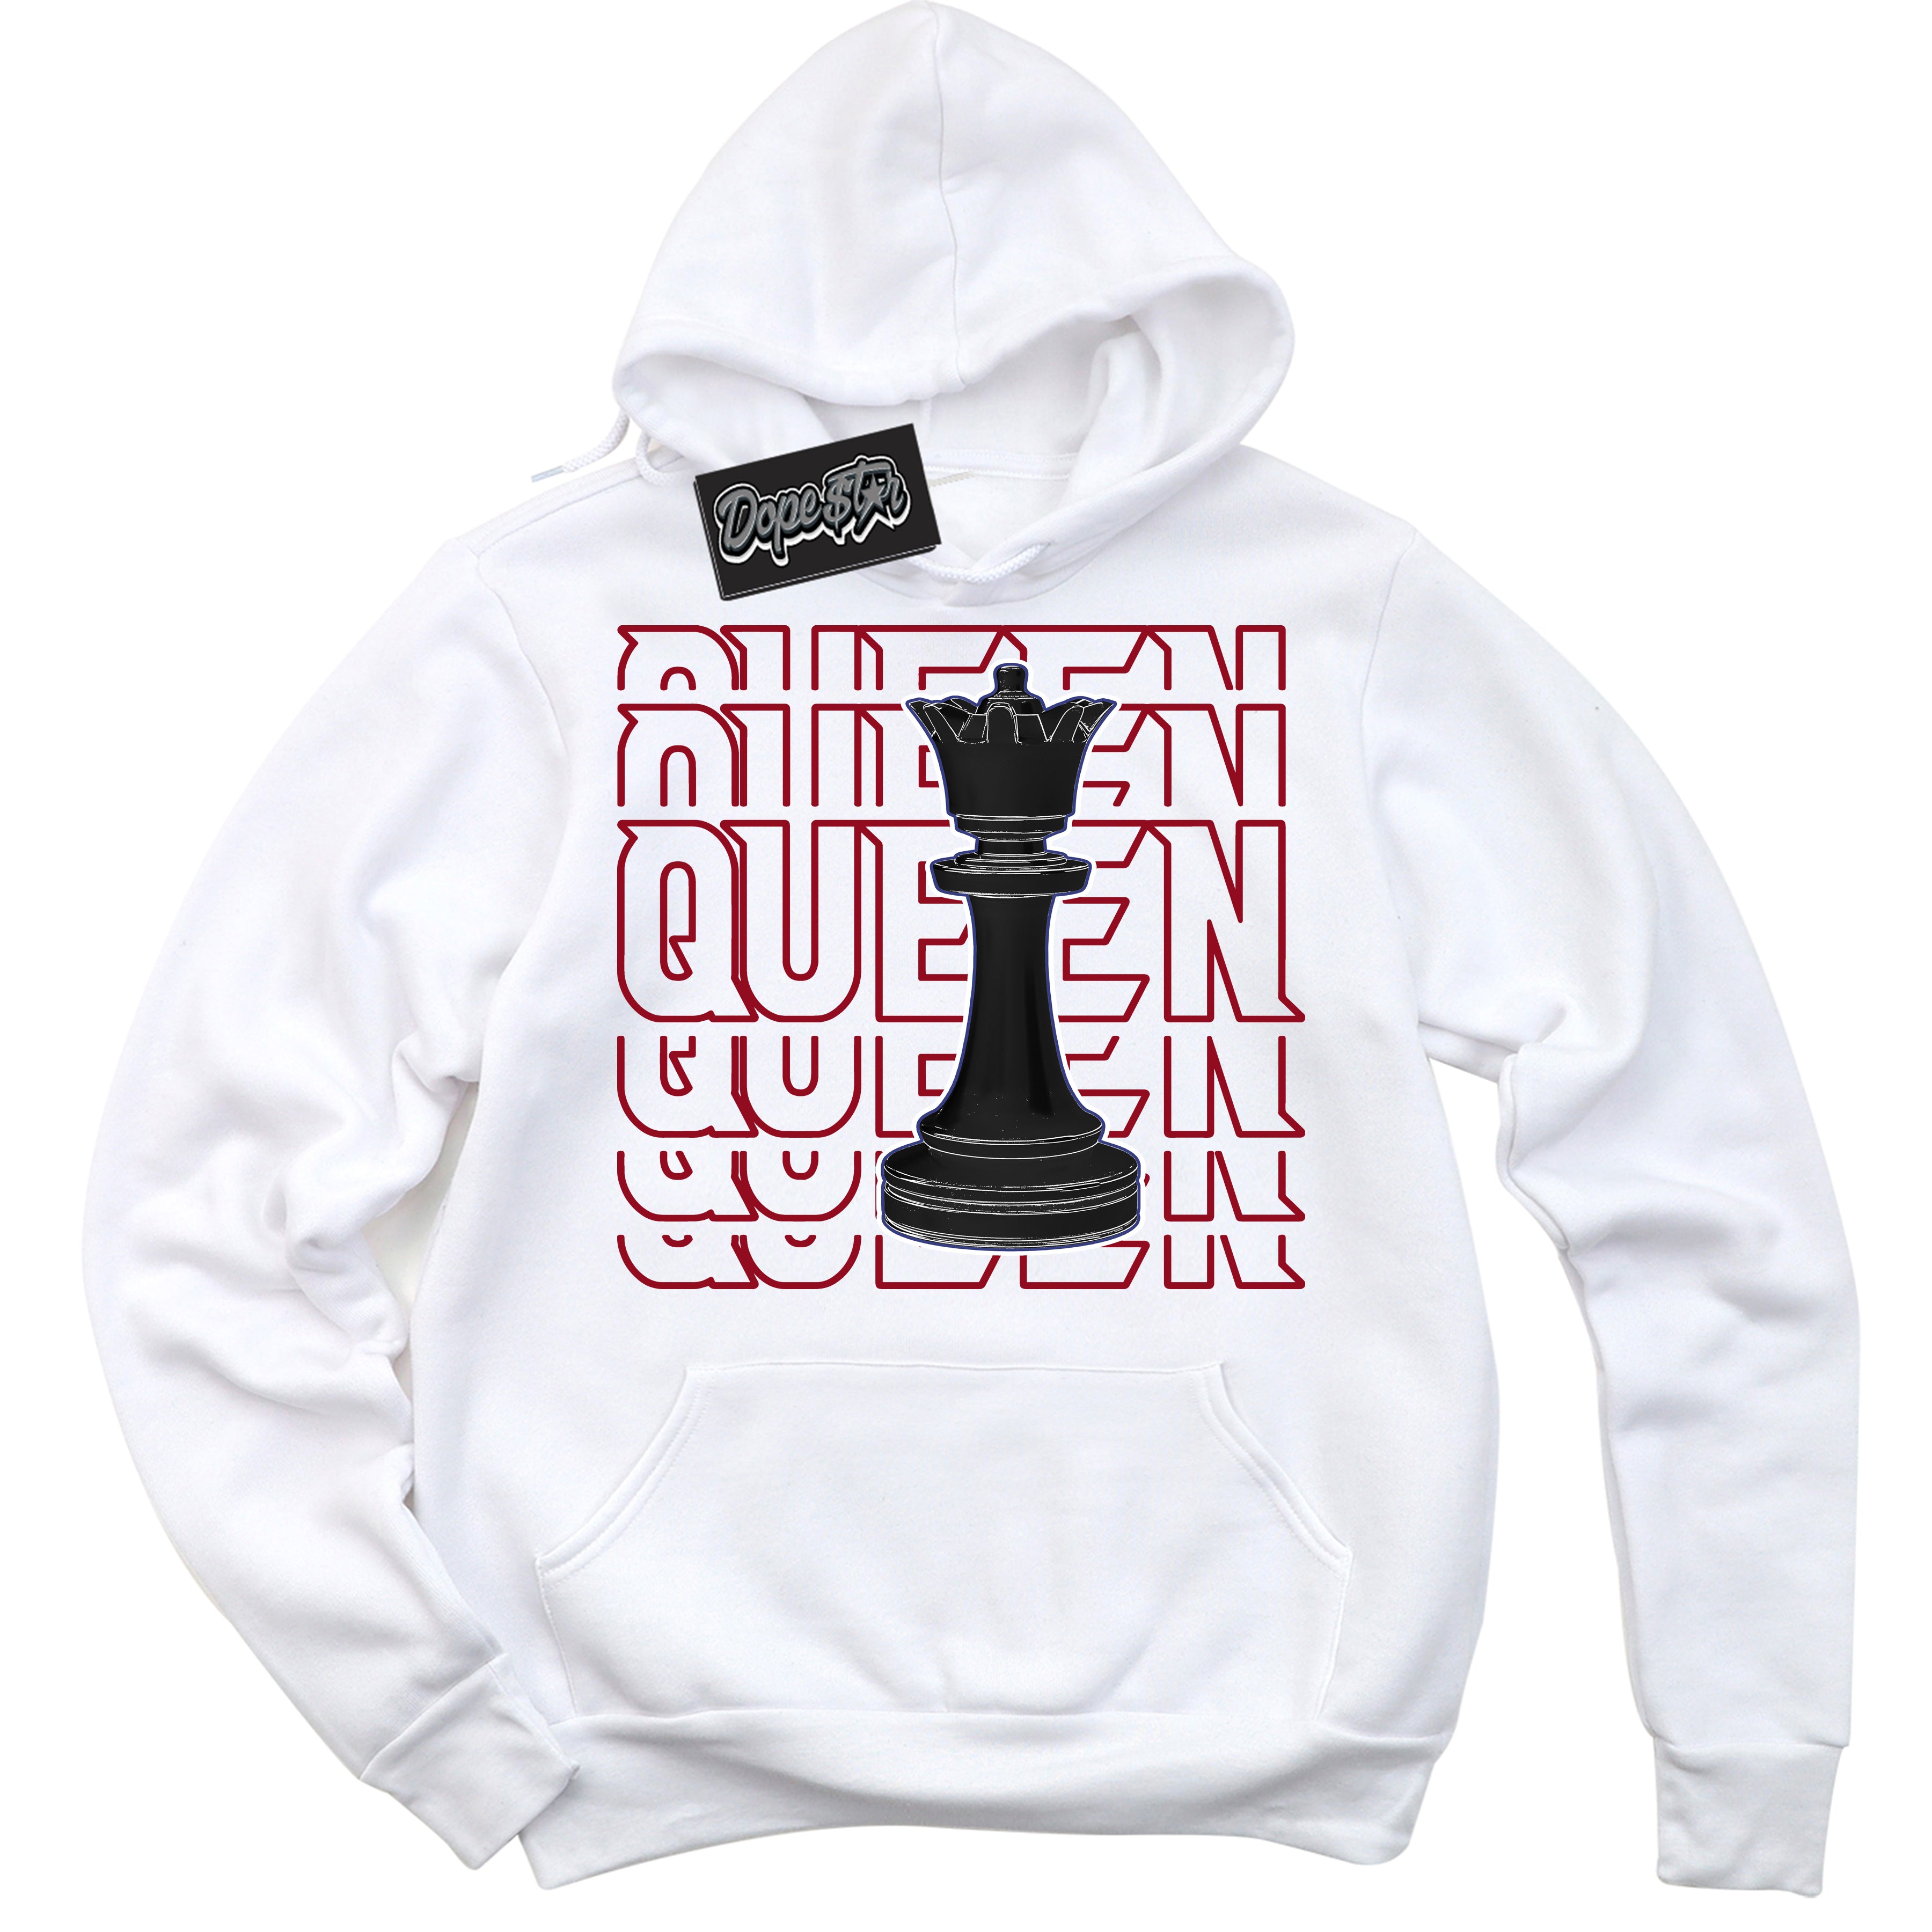 Cool White Hoodie with “ Queen Chess ”  design that Perfectly Matches Playoffs 8s Sneakers.